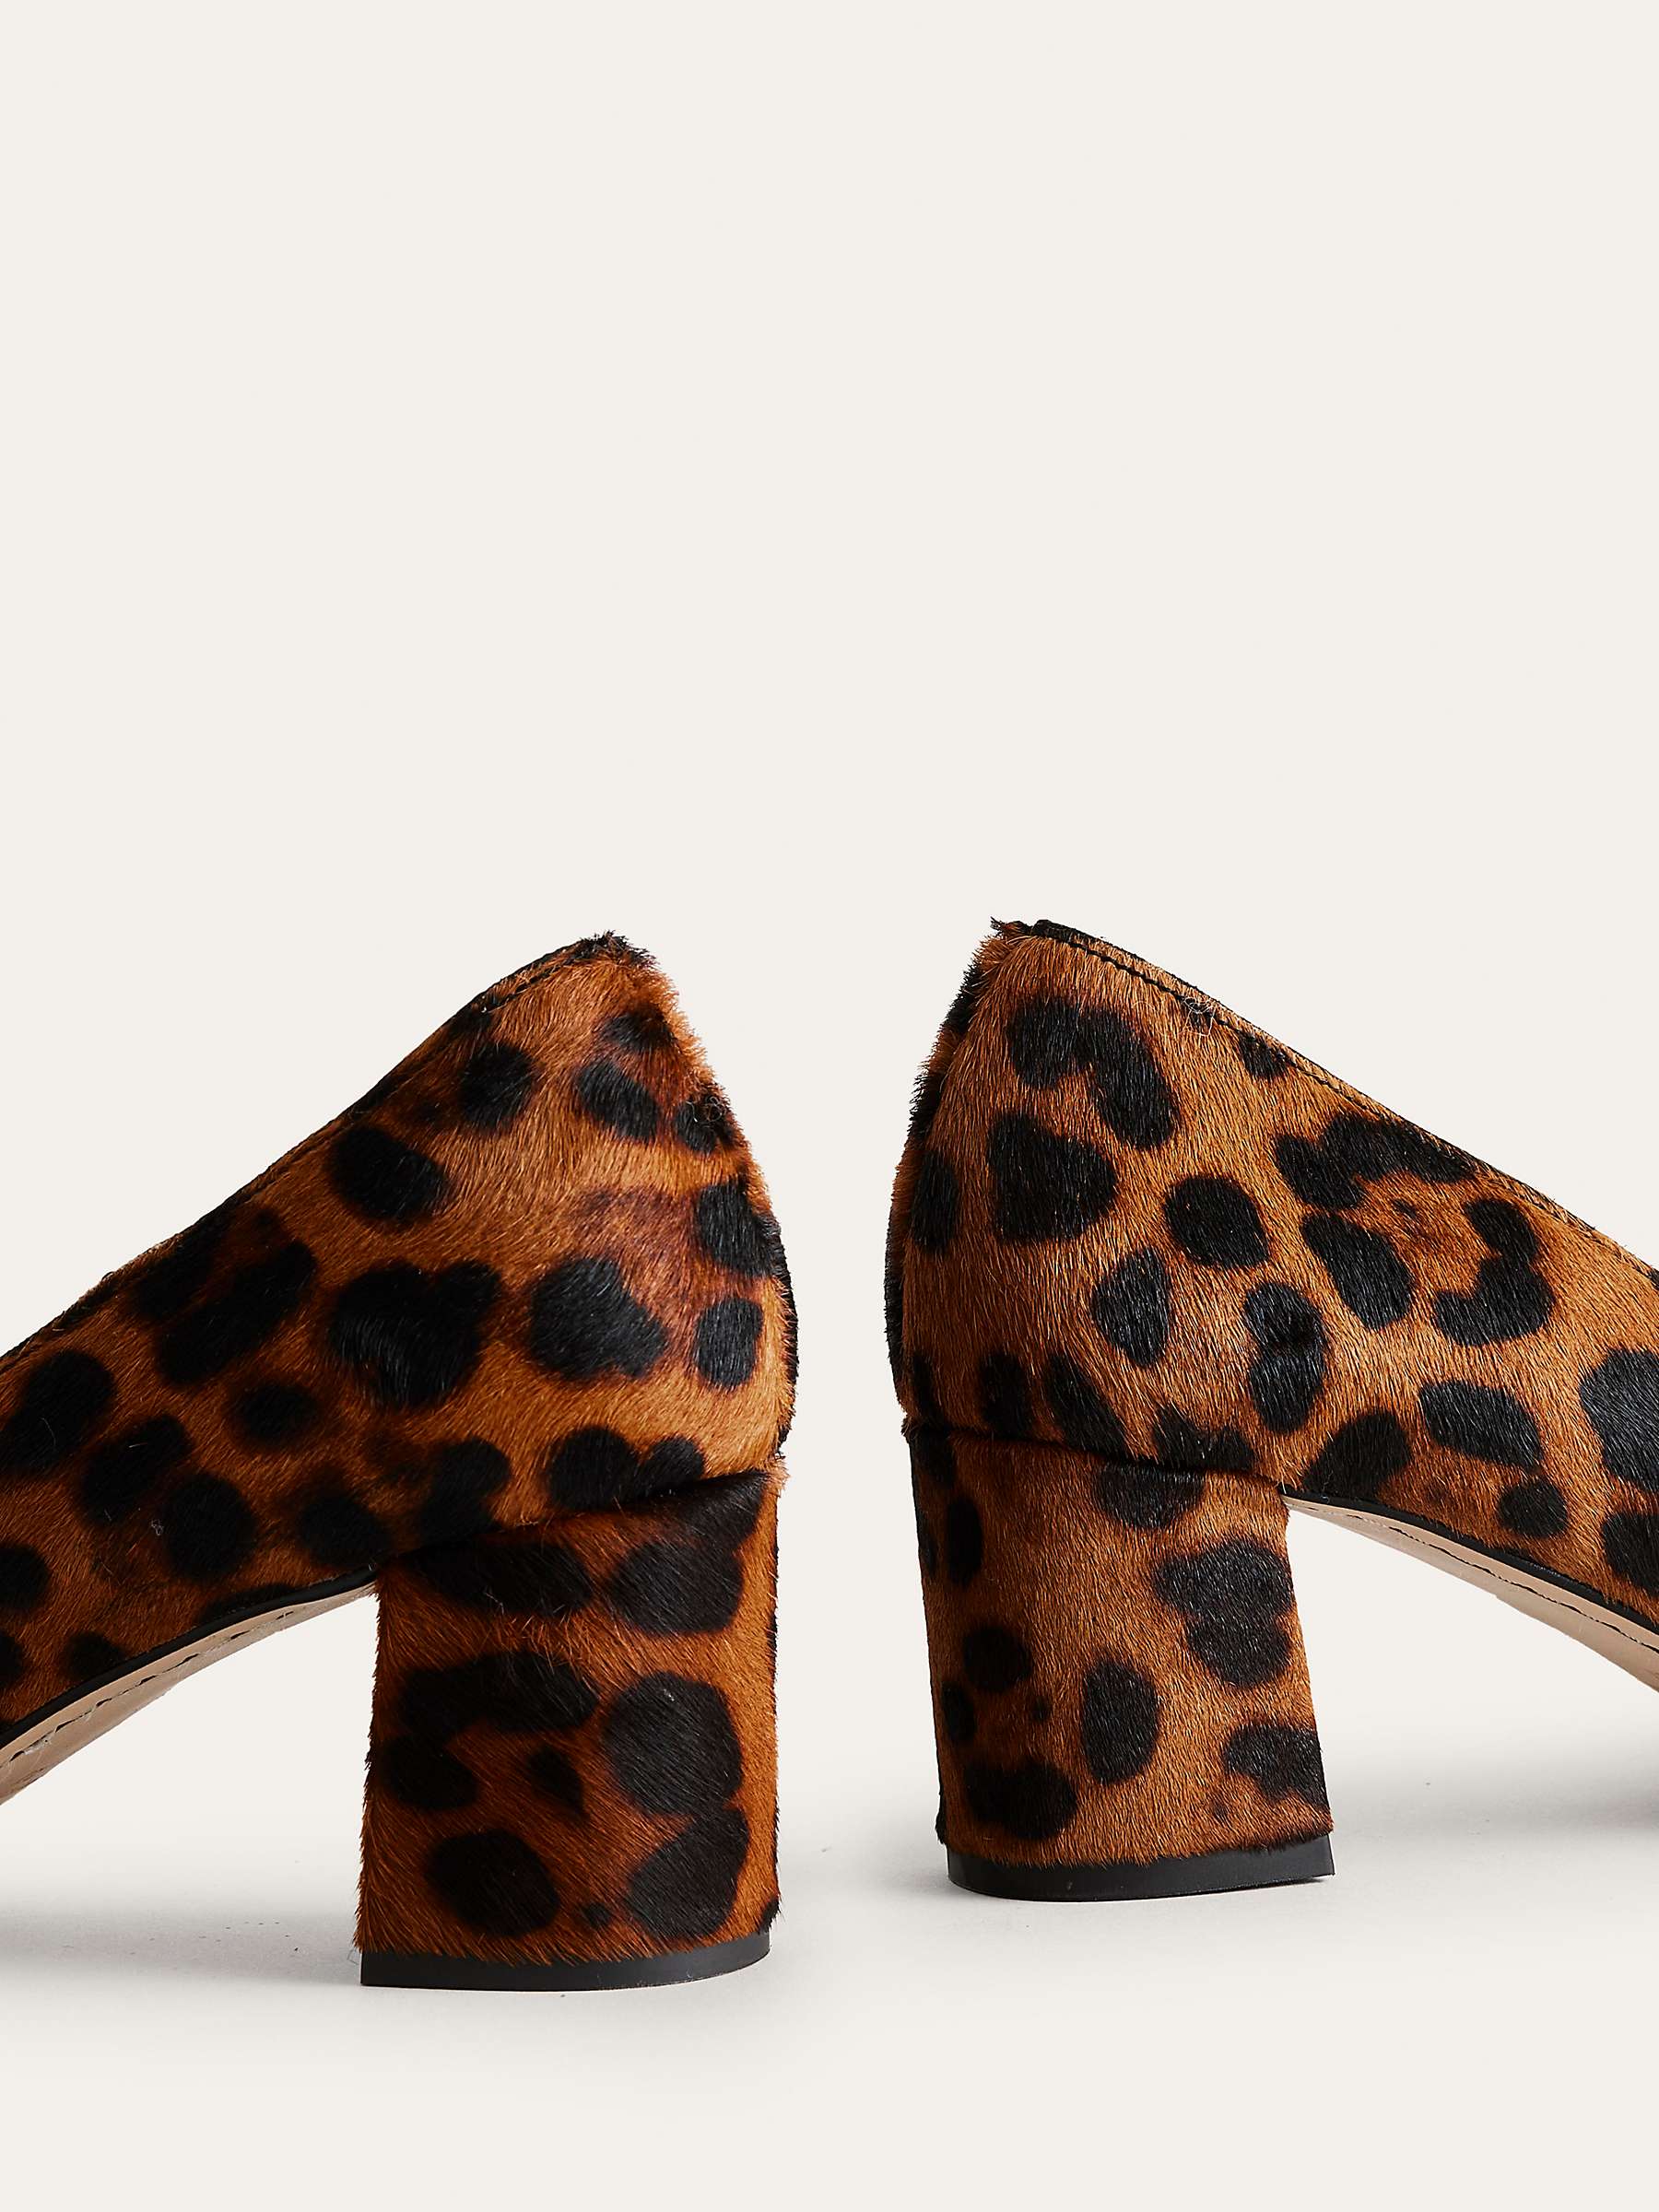 Buy Boden Mary Jane Block Heel Shoes, Classic Leopard Pony Online at johnlewis.com